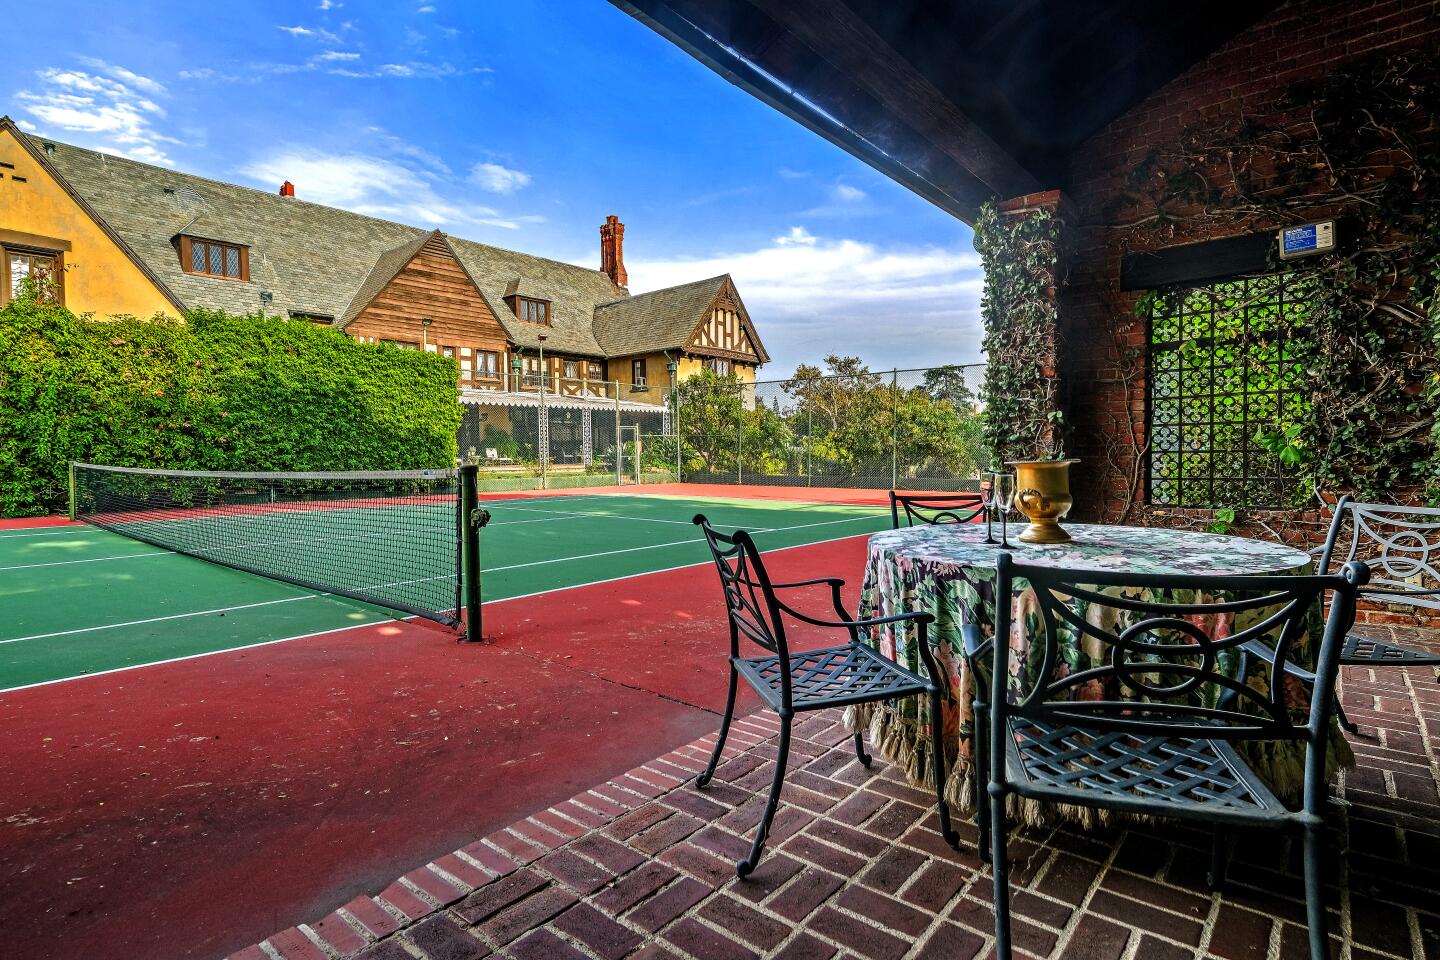 Metal patio furniture on a brick patio next to a tennis court